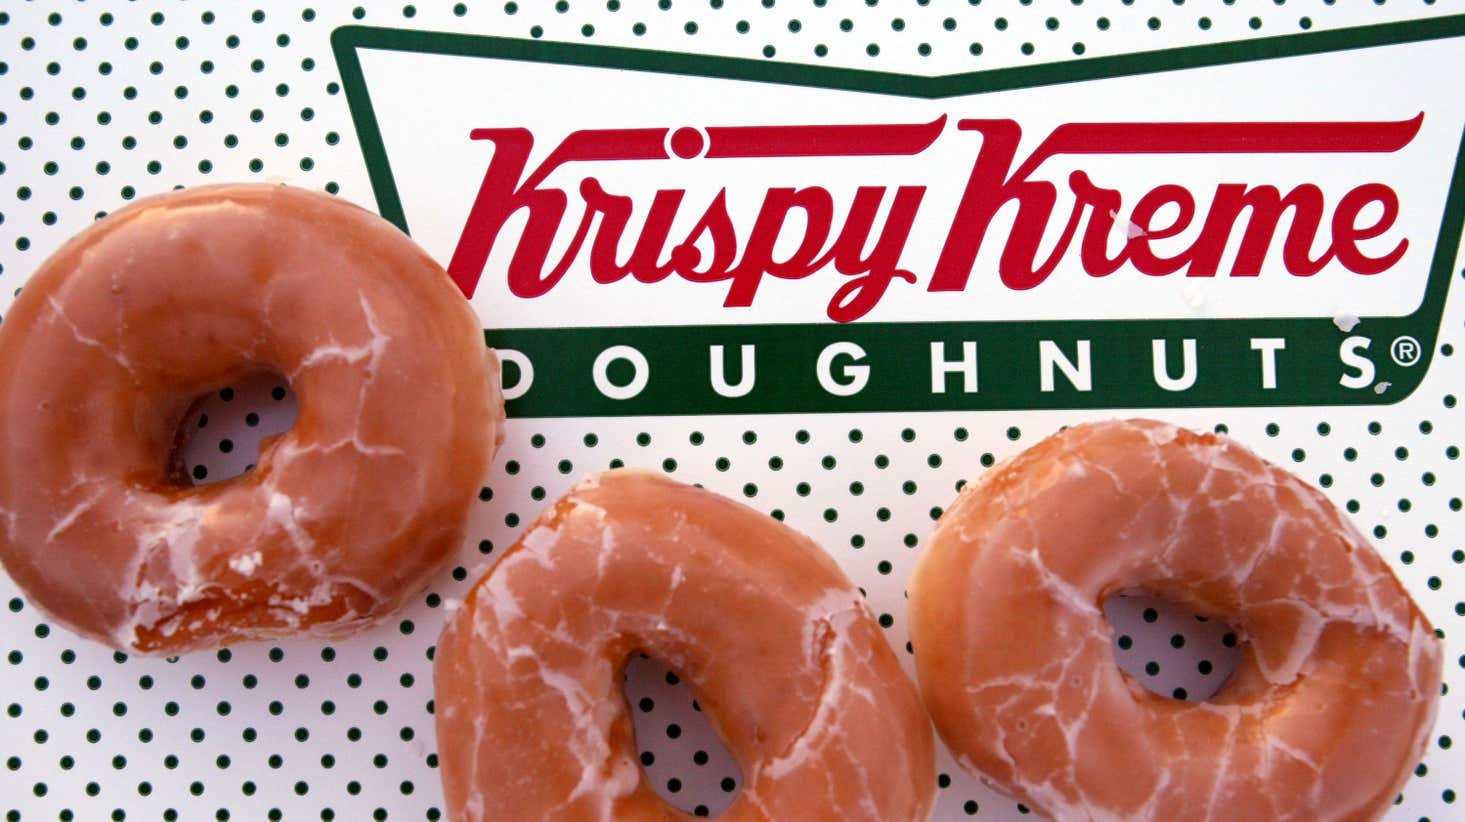 Krispy Kreme CEO Says Robots Will Frost and Fill Donuts Soon | Gizmodo